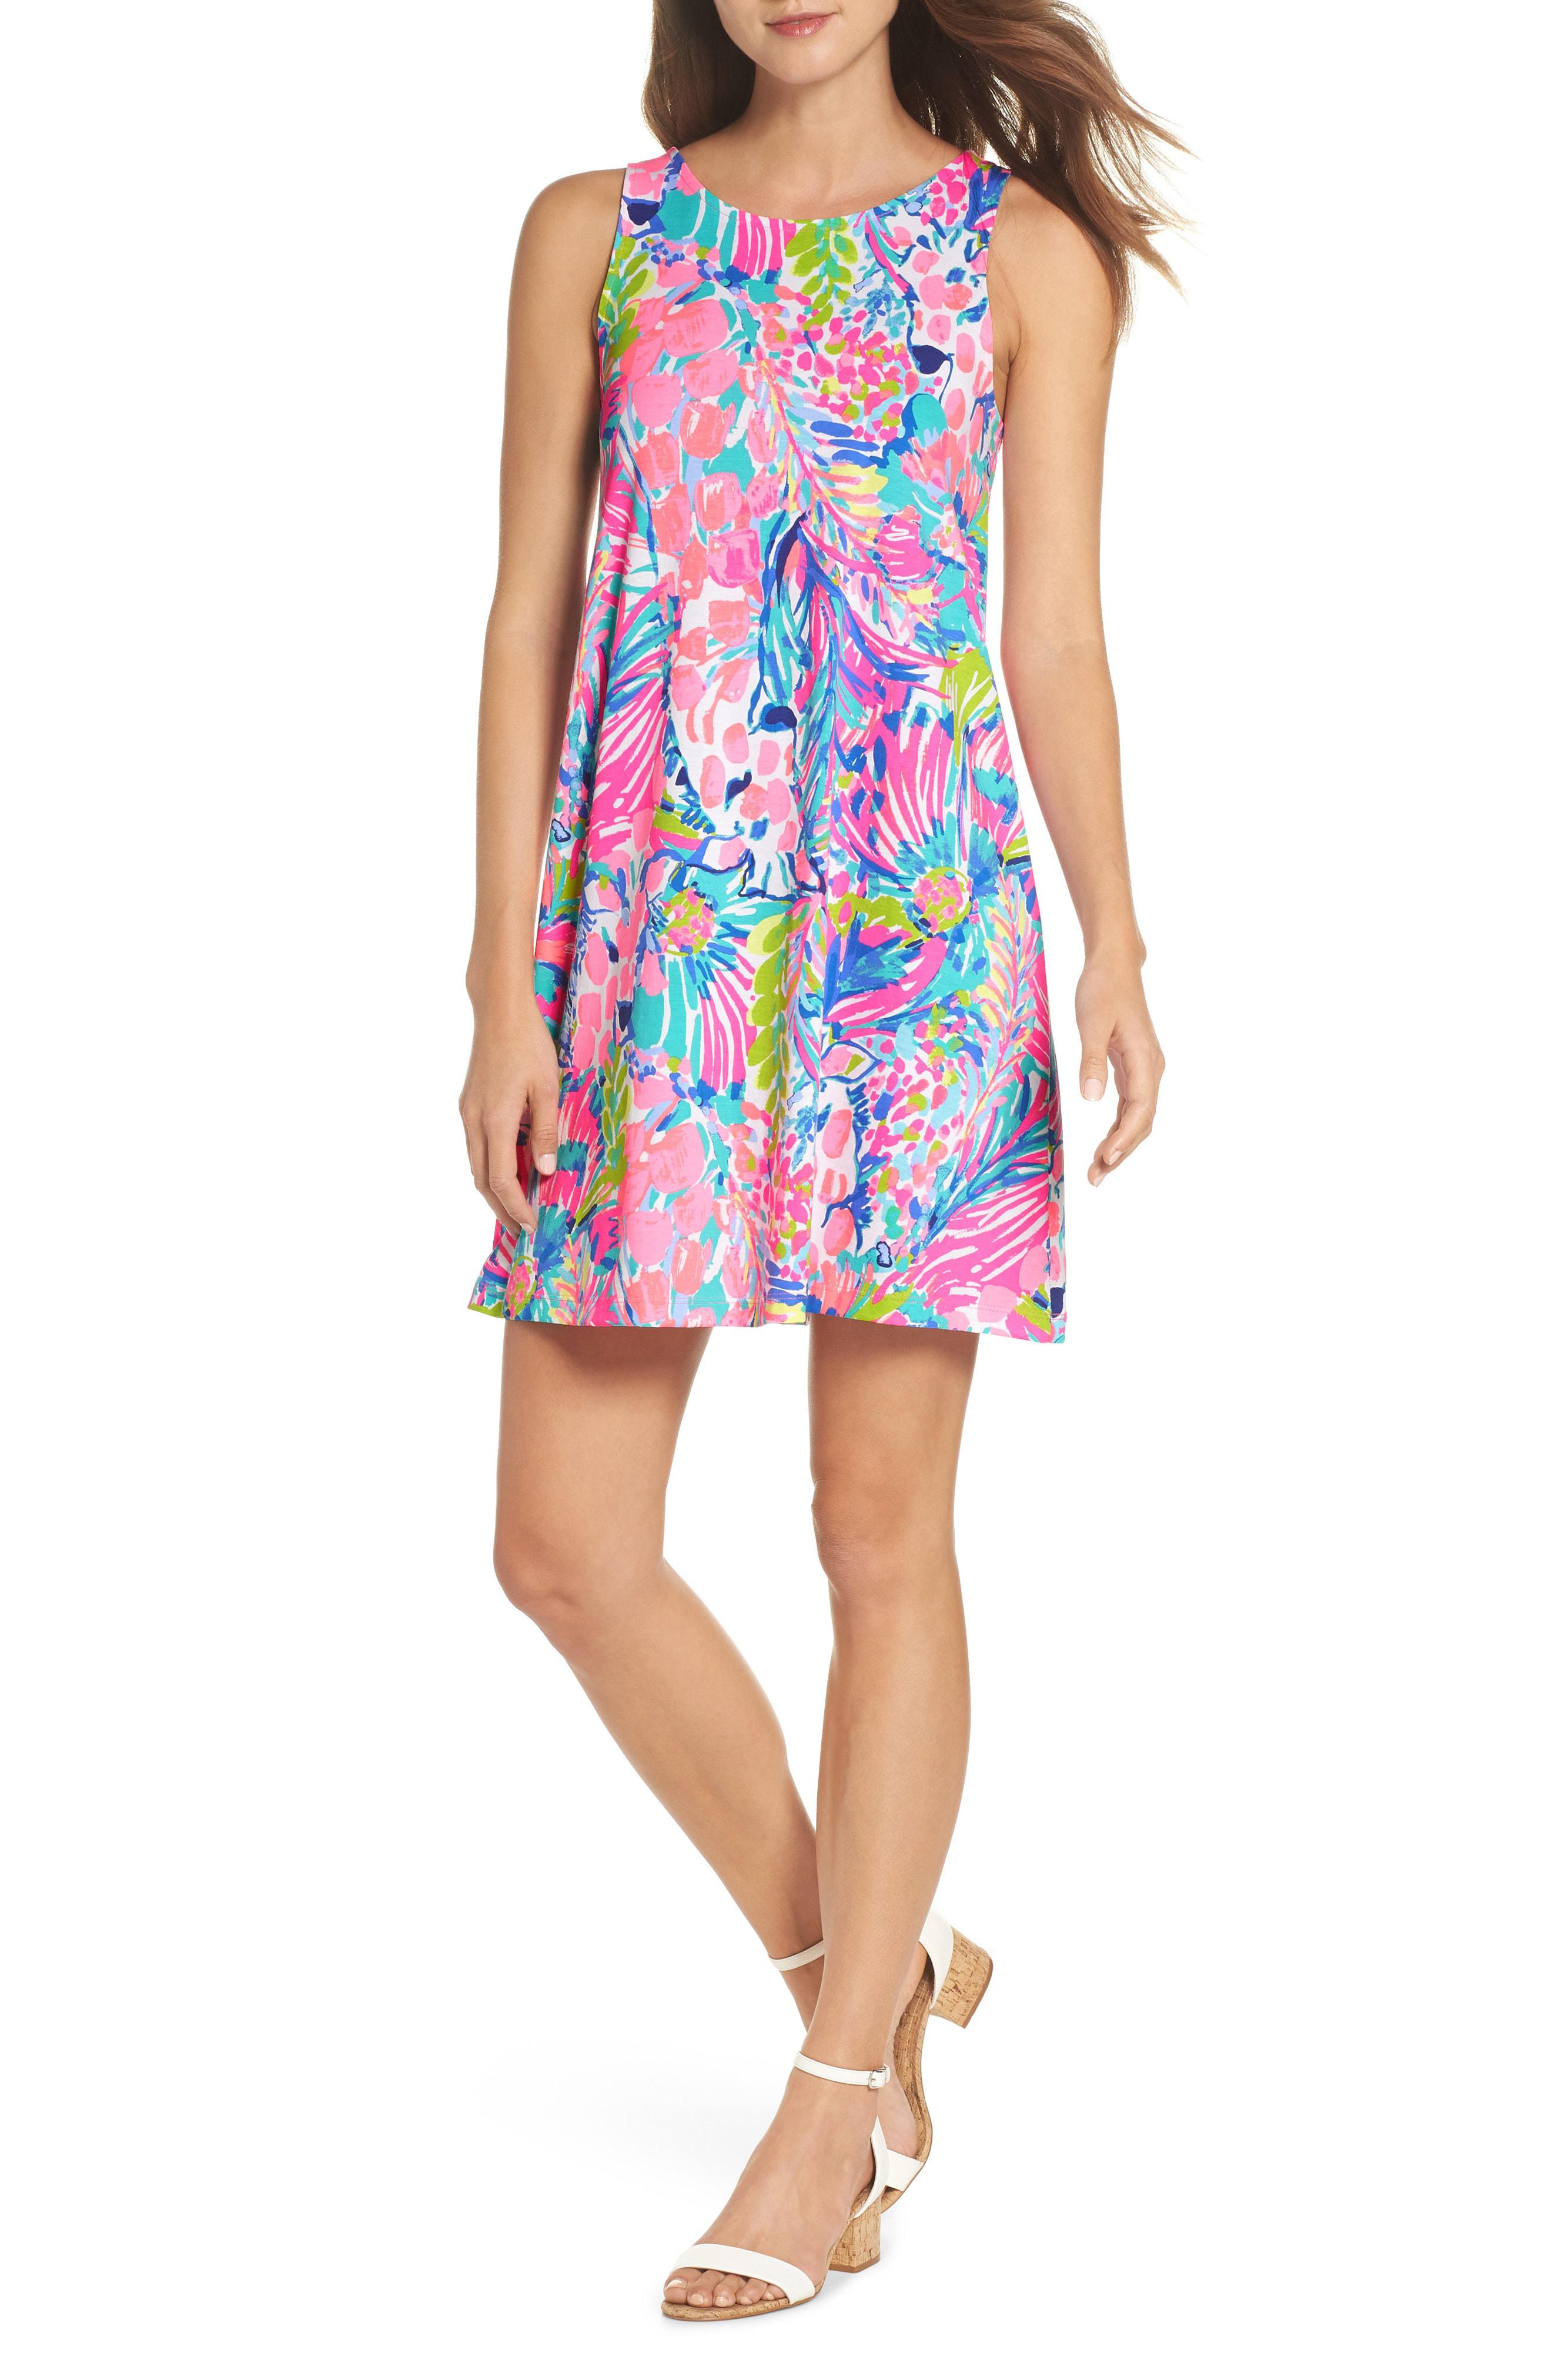 Lyst Lilly Pulitzer Lilly Pulitzer Kristen Trapeze Dress In Blue